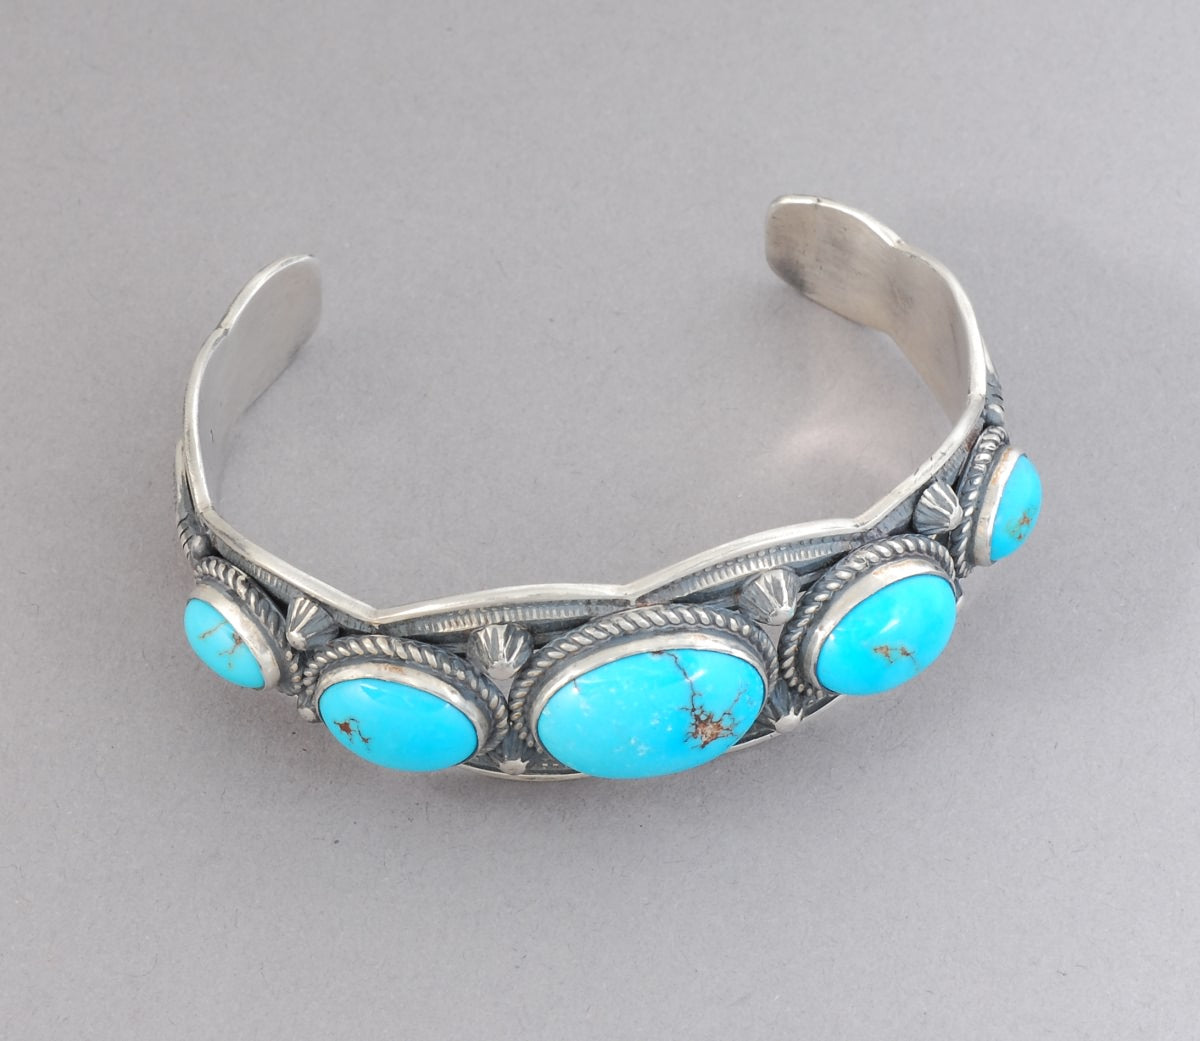 Cuff Bracelet with Old Persian Turquoise by Leonard Chee